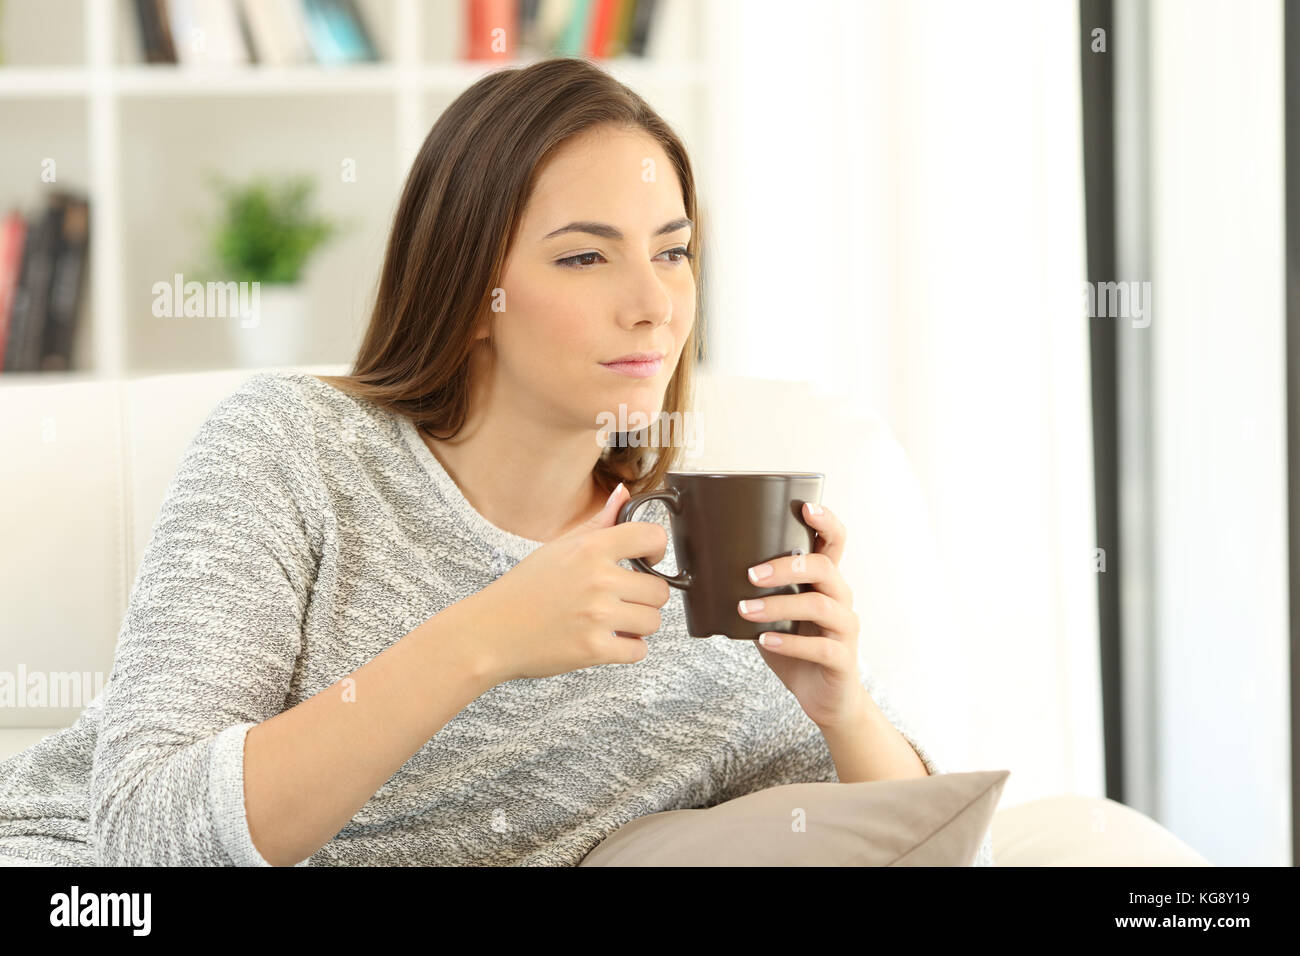 Portrait of a pensive girl holding a cup of coffee sitting on a sofa at home Stock Photo